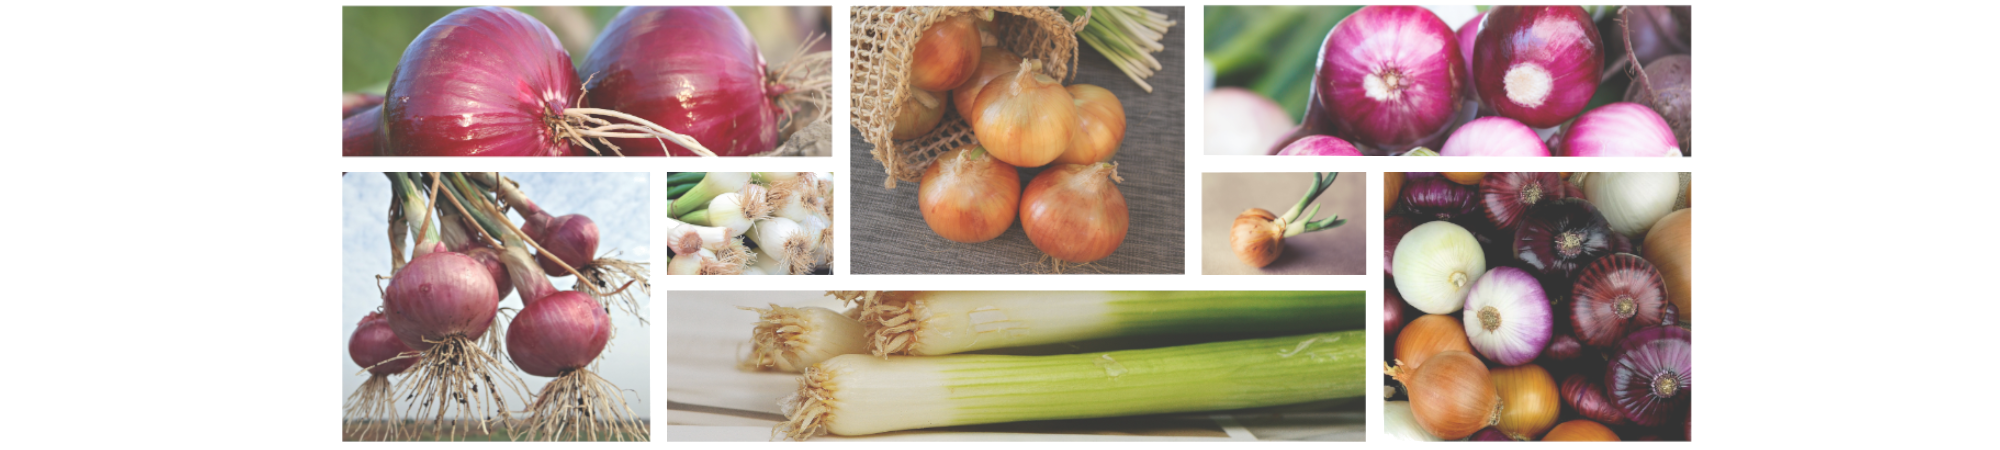 The “onion syndrome” in projects:7 practical tips to nip it in the bud